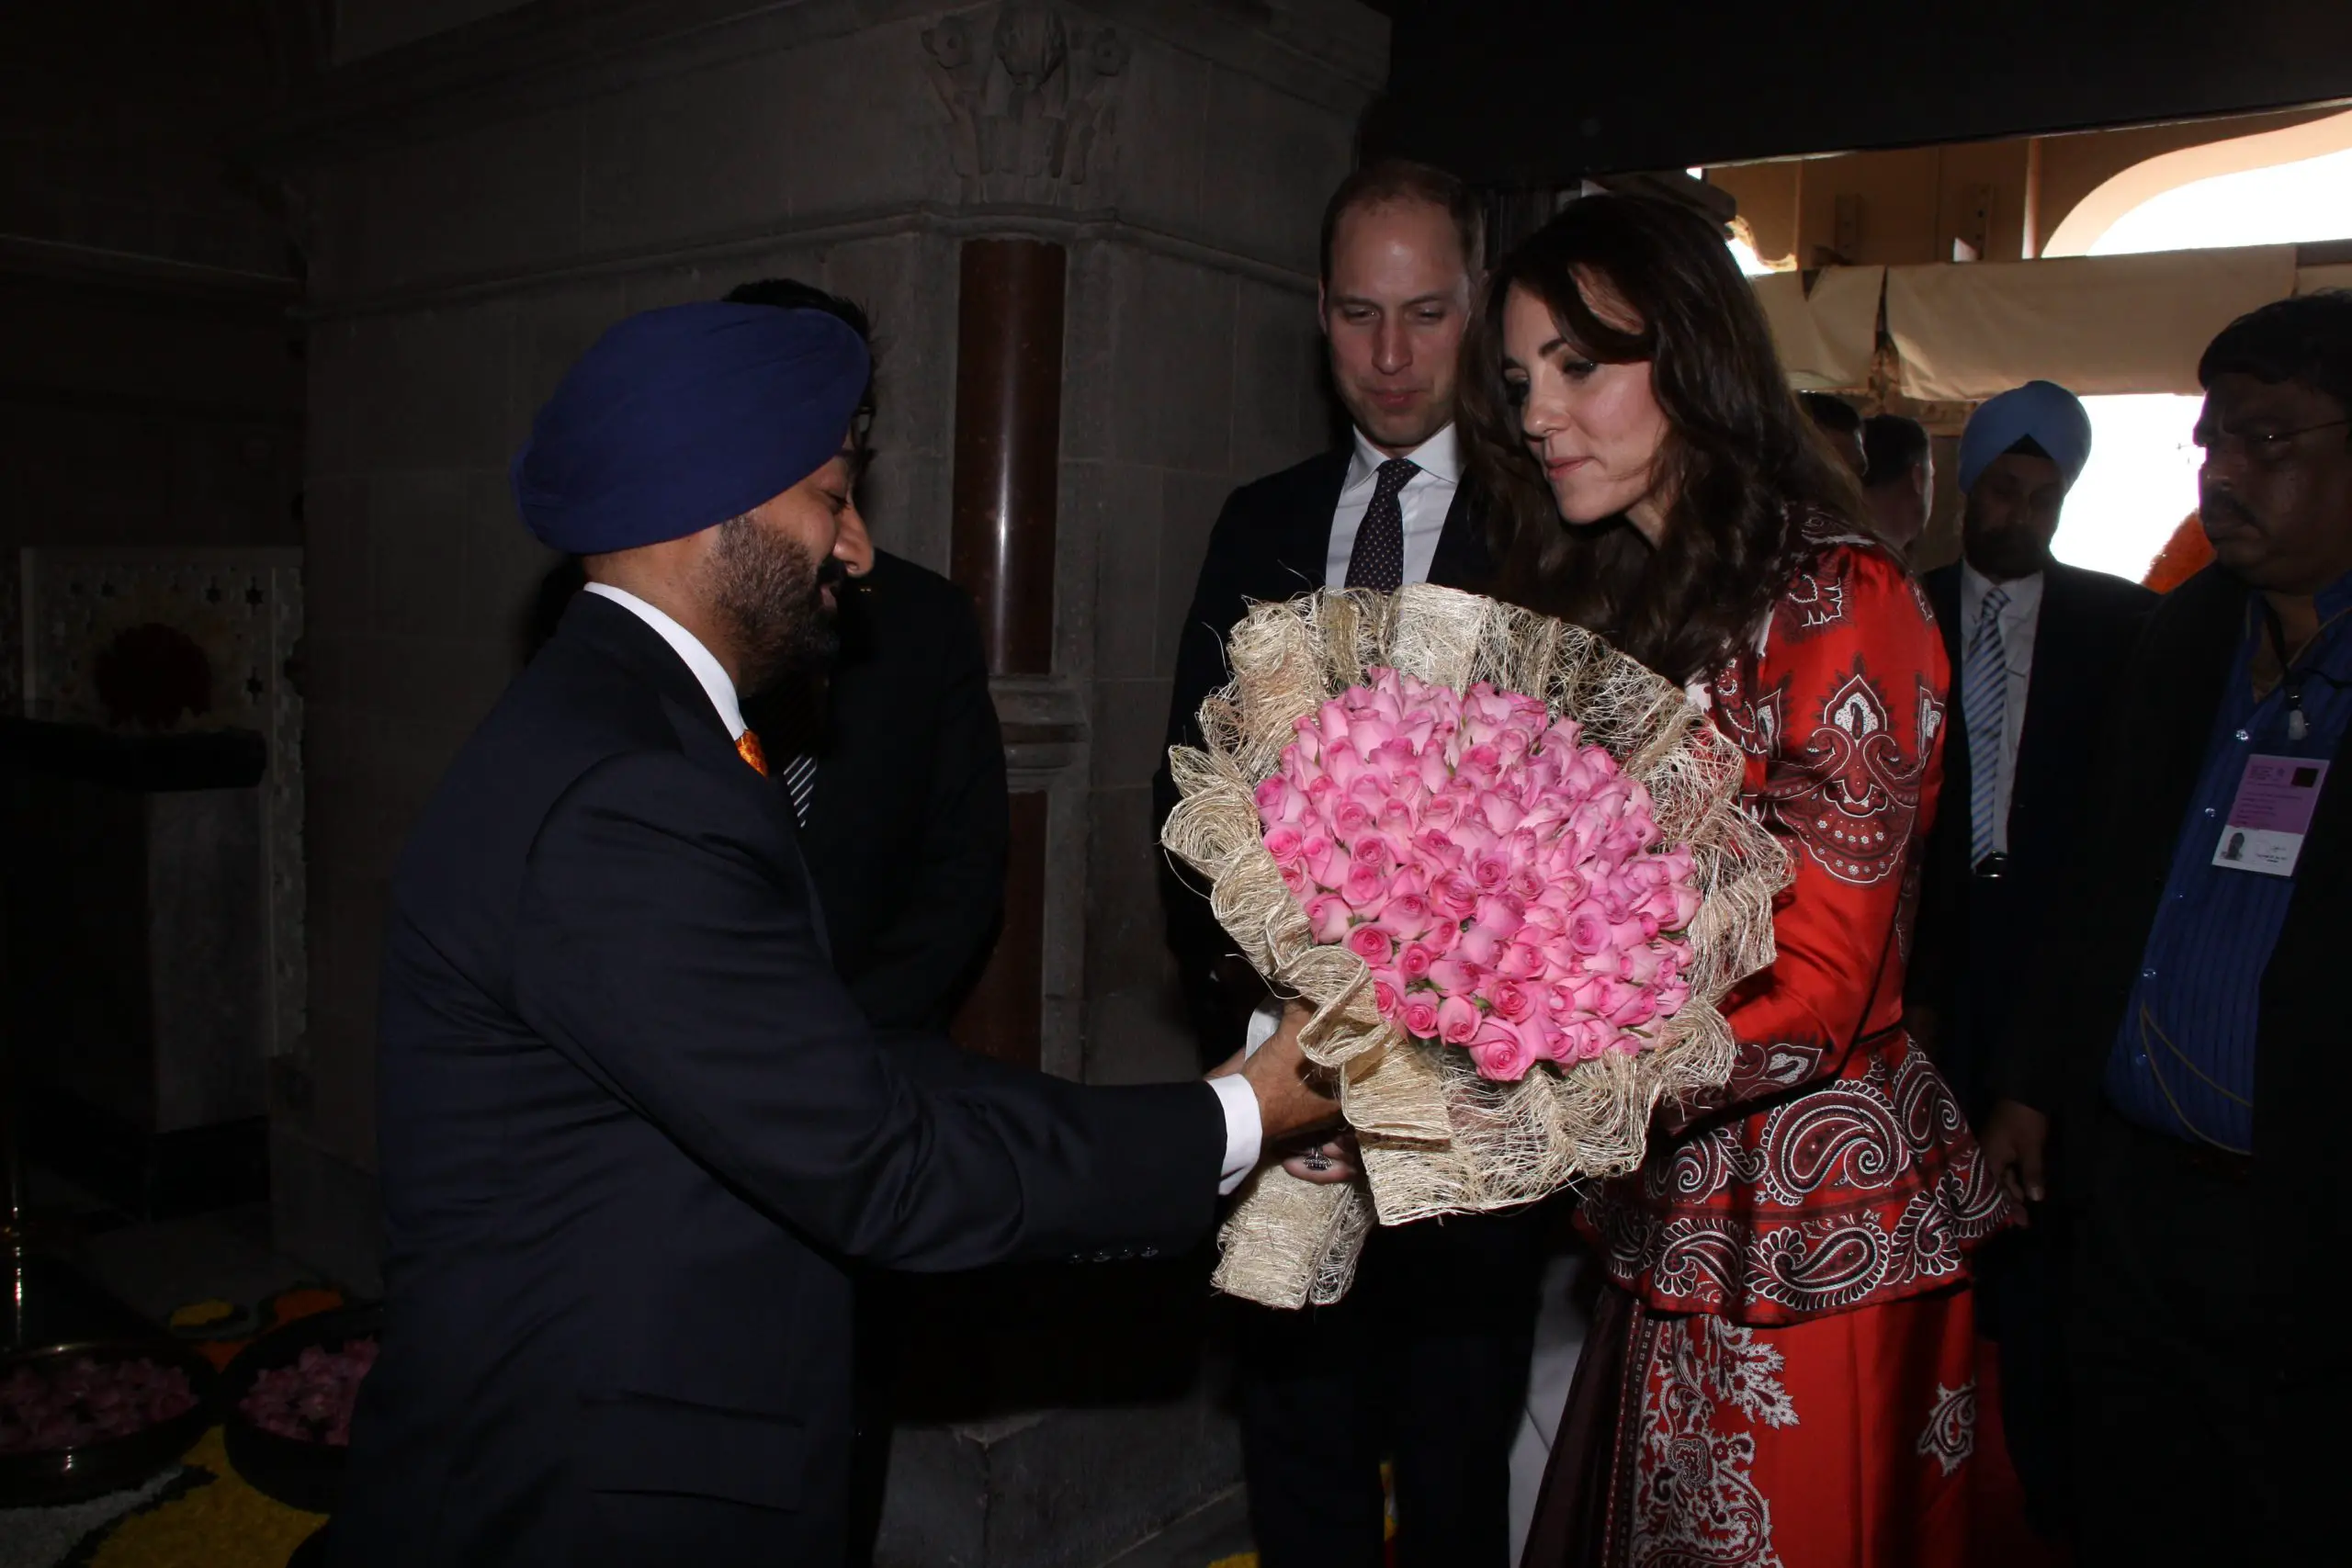 The Duchess of Cambridge received floral welcome at The Taj Mahal Hotel in Mumbai